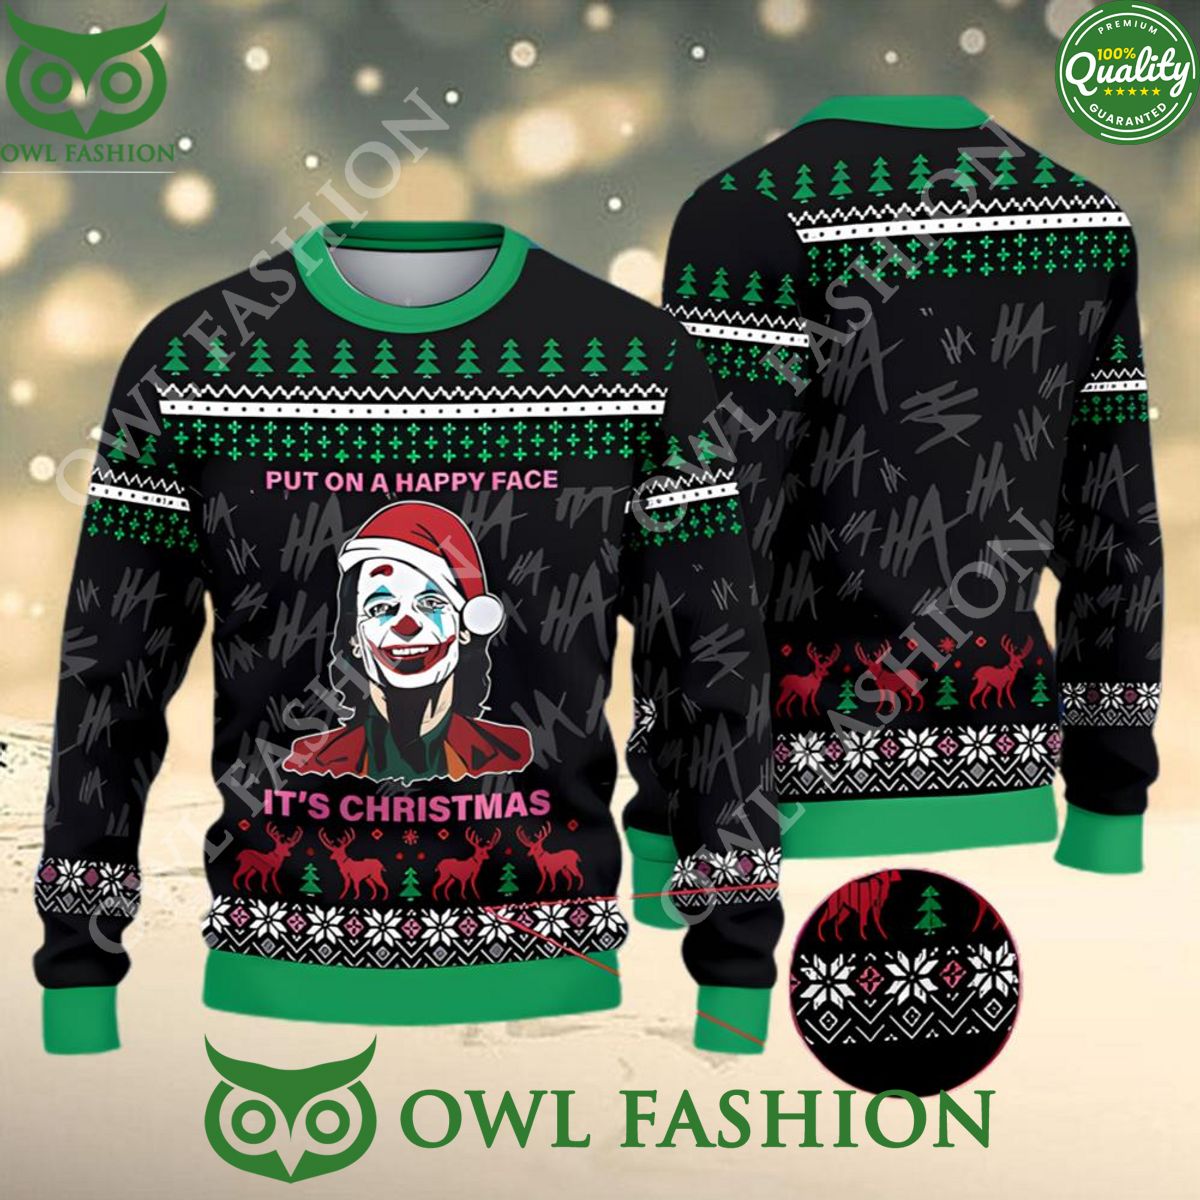 joker put on a happy face its ugly christmas sweater jumper ugly 1 hAHwH.jpg